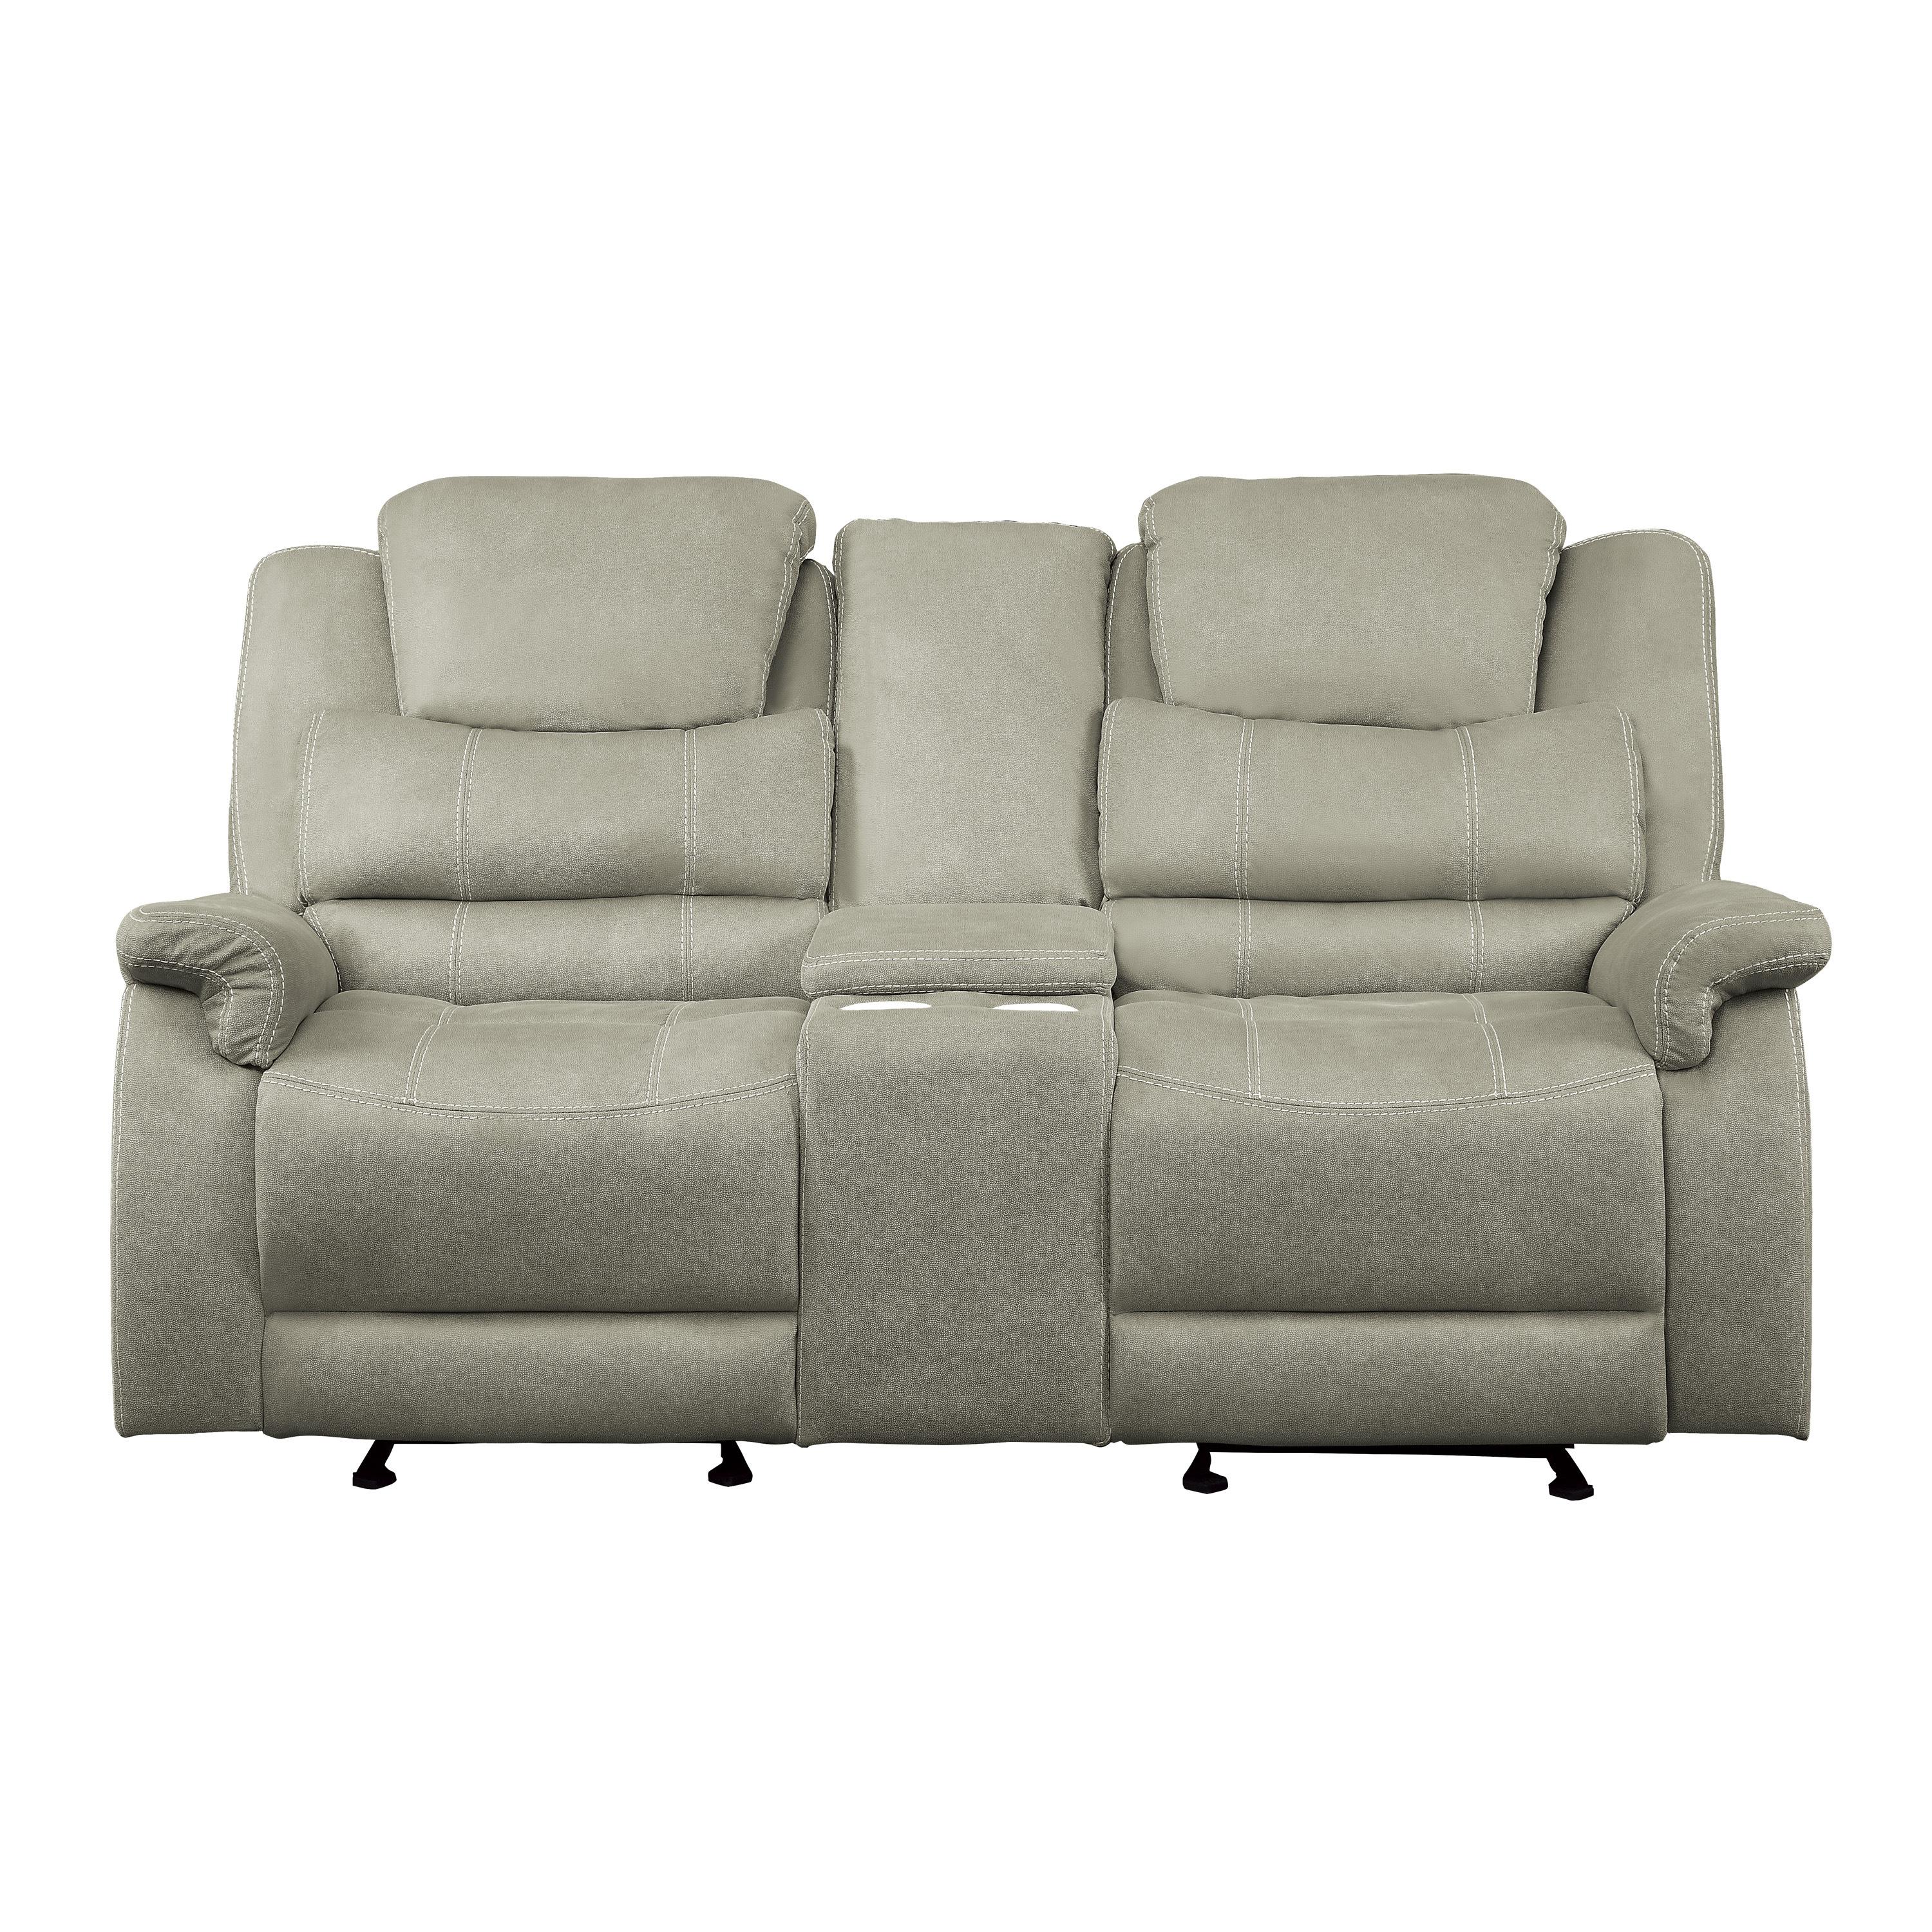 Transitional Reclining Loveseat 9848GY-2 Shola 9848GY-2 in Gray Microfiber